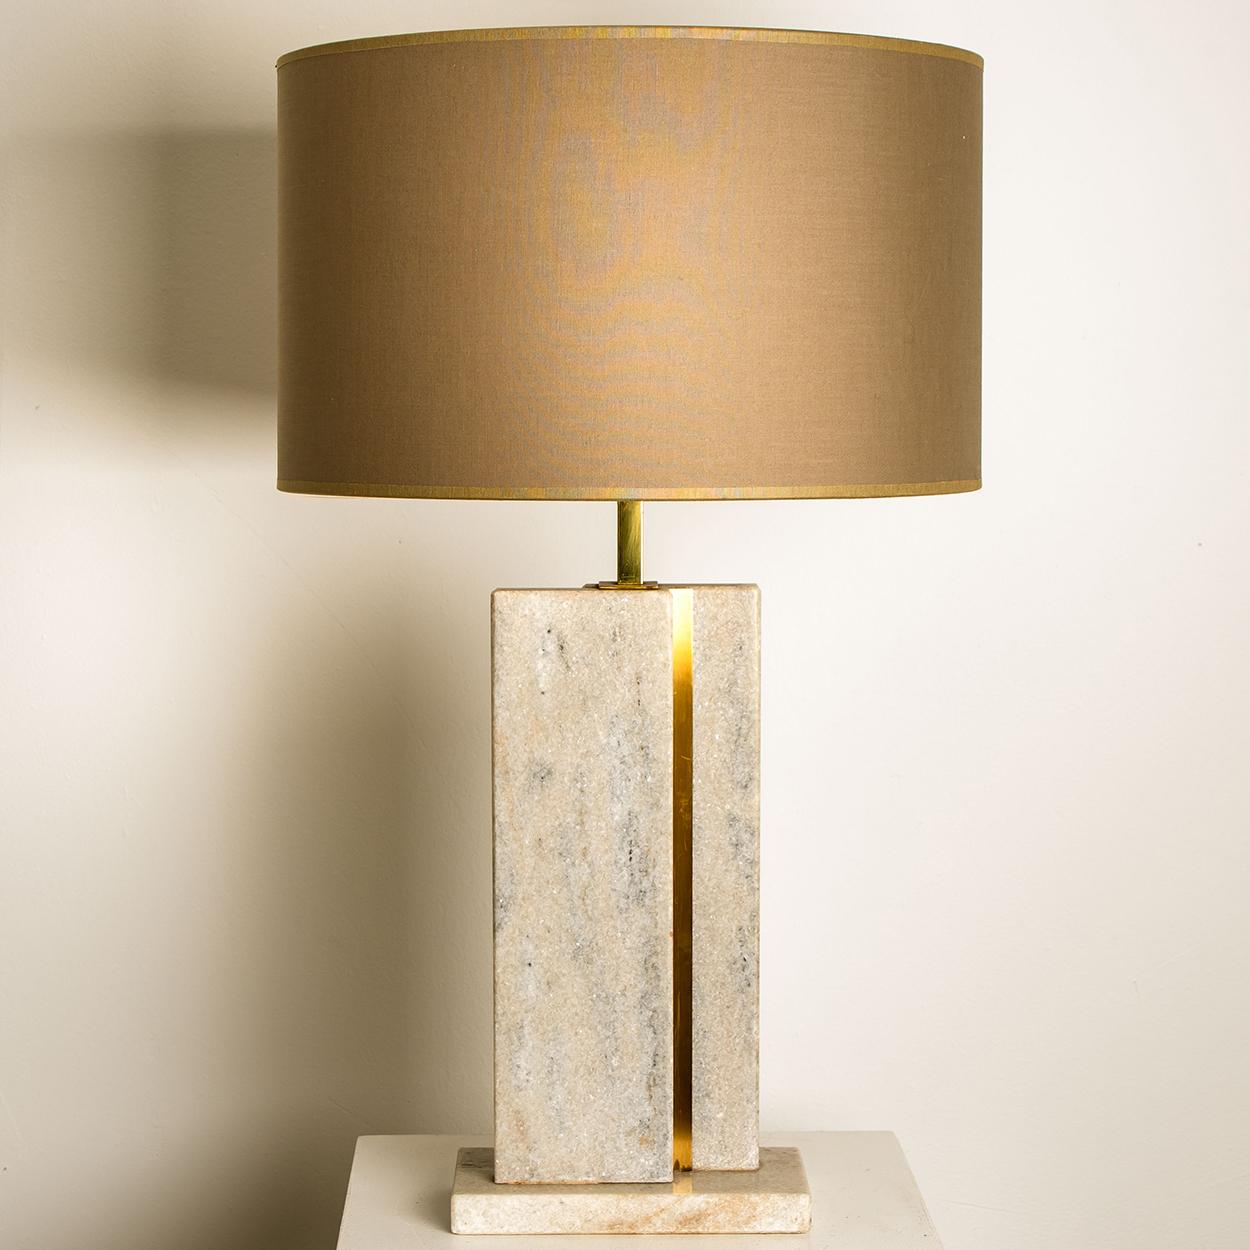 Camille Breesch Travertine Table Lamp with New Shade For Sale 1